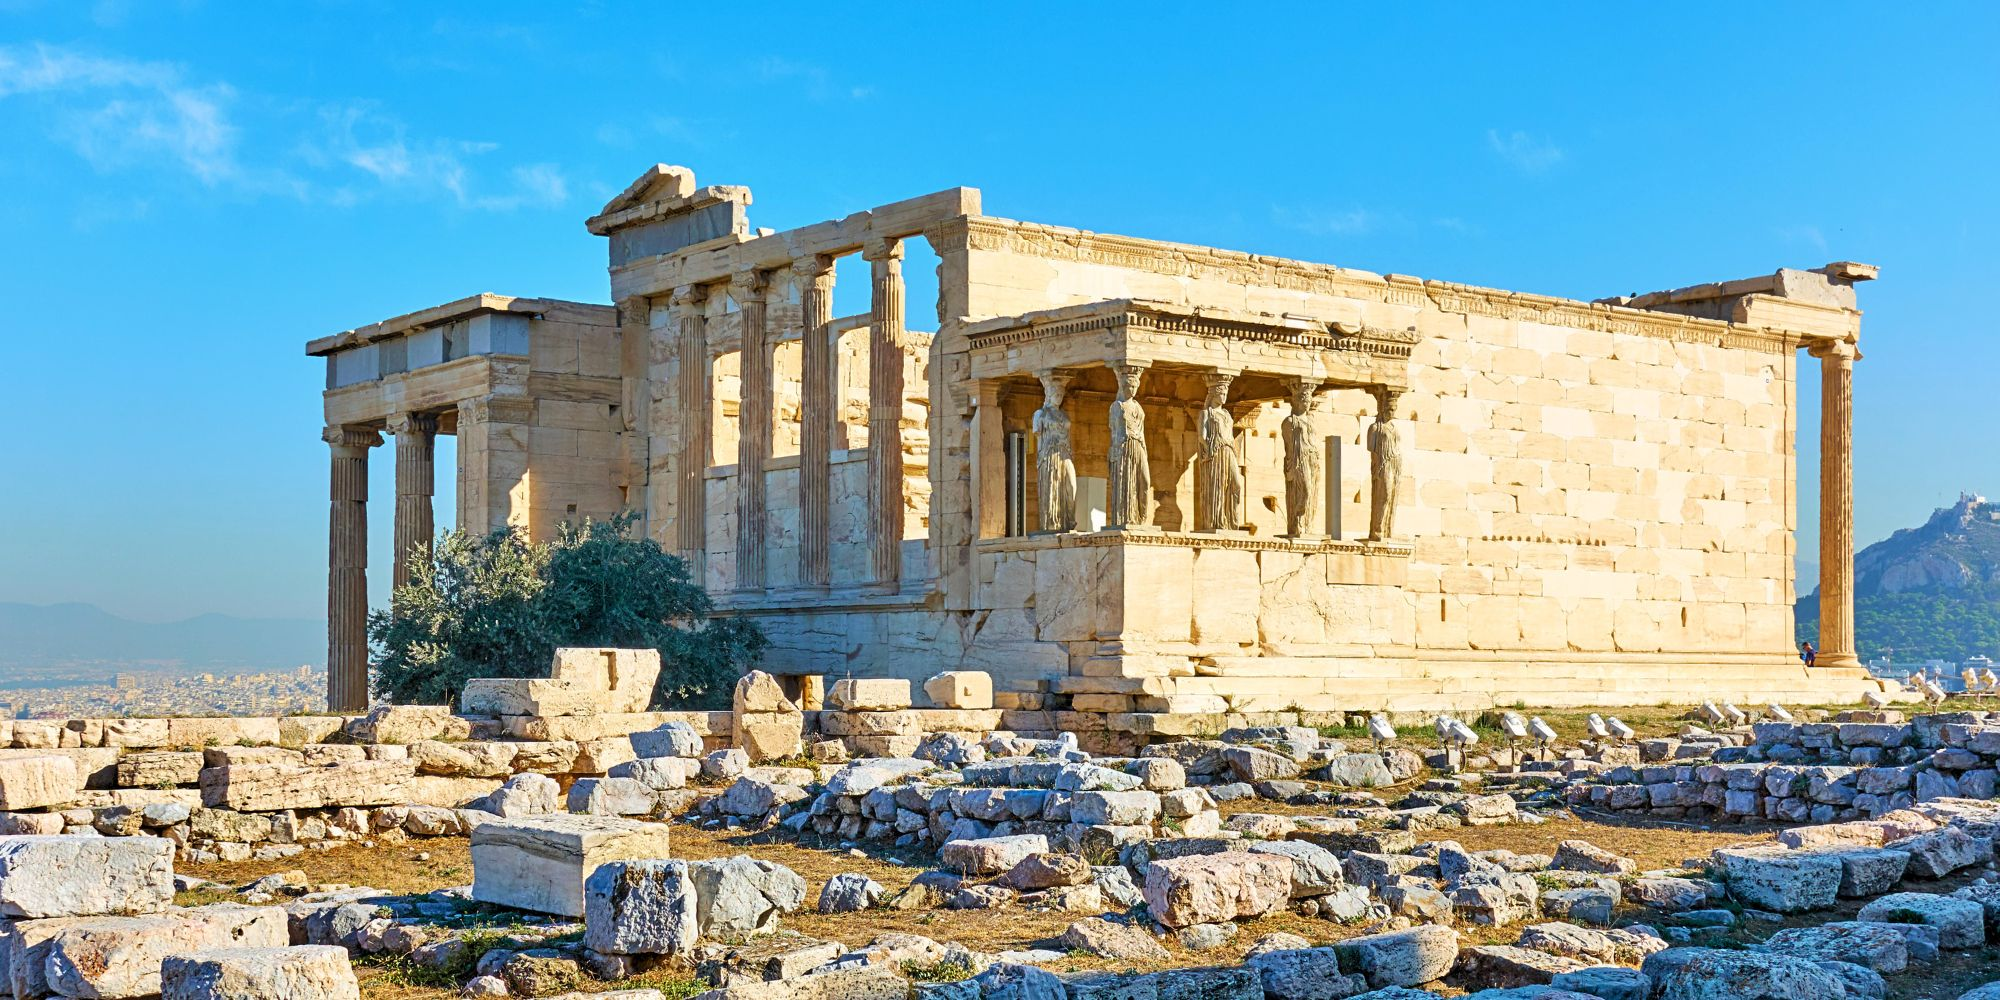 <p><span>The most sacred spot on the Acropolis. Replaced the “Old Temple”. Located where Athena and Poseidon competed for patronage of Athens.</span></p><p><span>Named for Erechtheus, Athena’s semi-son and the hero from whom all Athenians claim descent.</span></p><p><span>Houses the tomb of the mythical king of Athens, Kekrops, who had the head of a man and the body of a snake.</span></p>